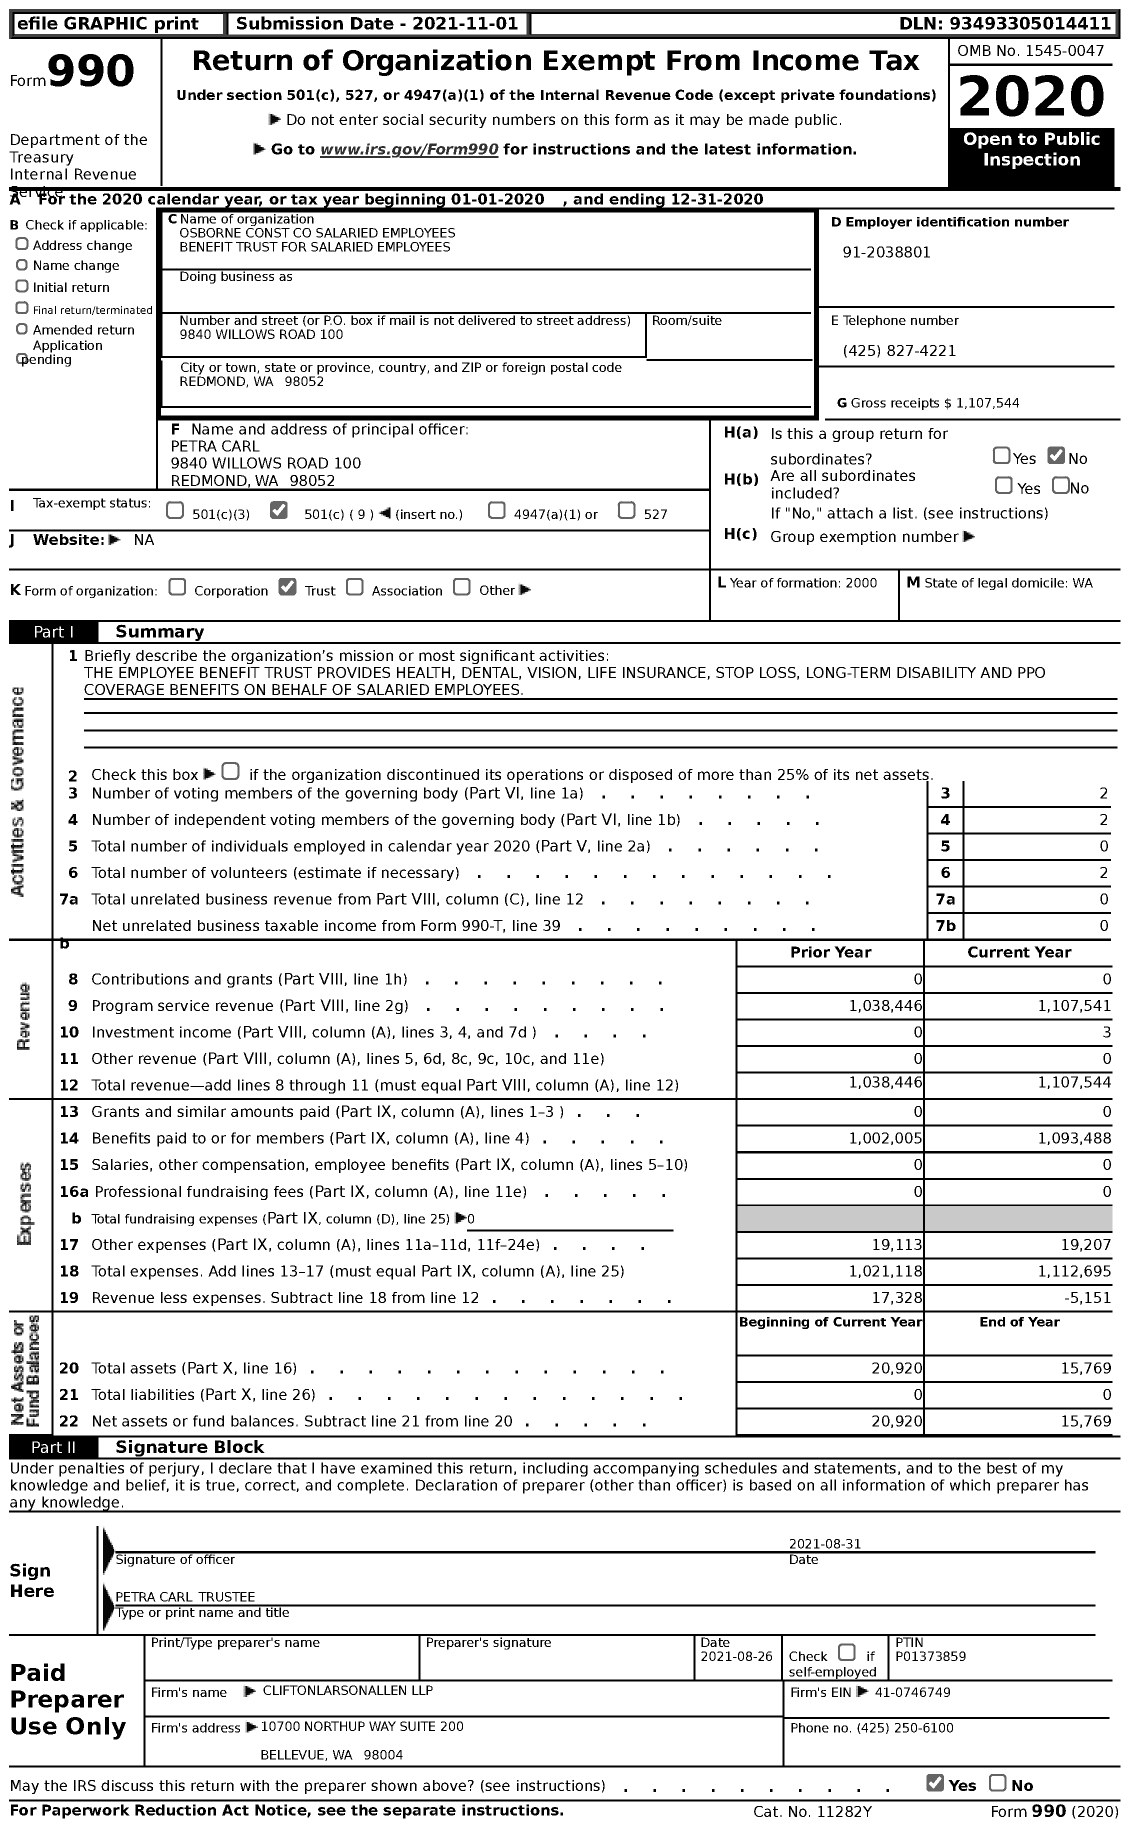 Image of first page of 2020 Form 990 for Osborne Const Salaried Employees Benefit Trust for Salaried Employees